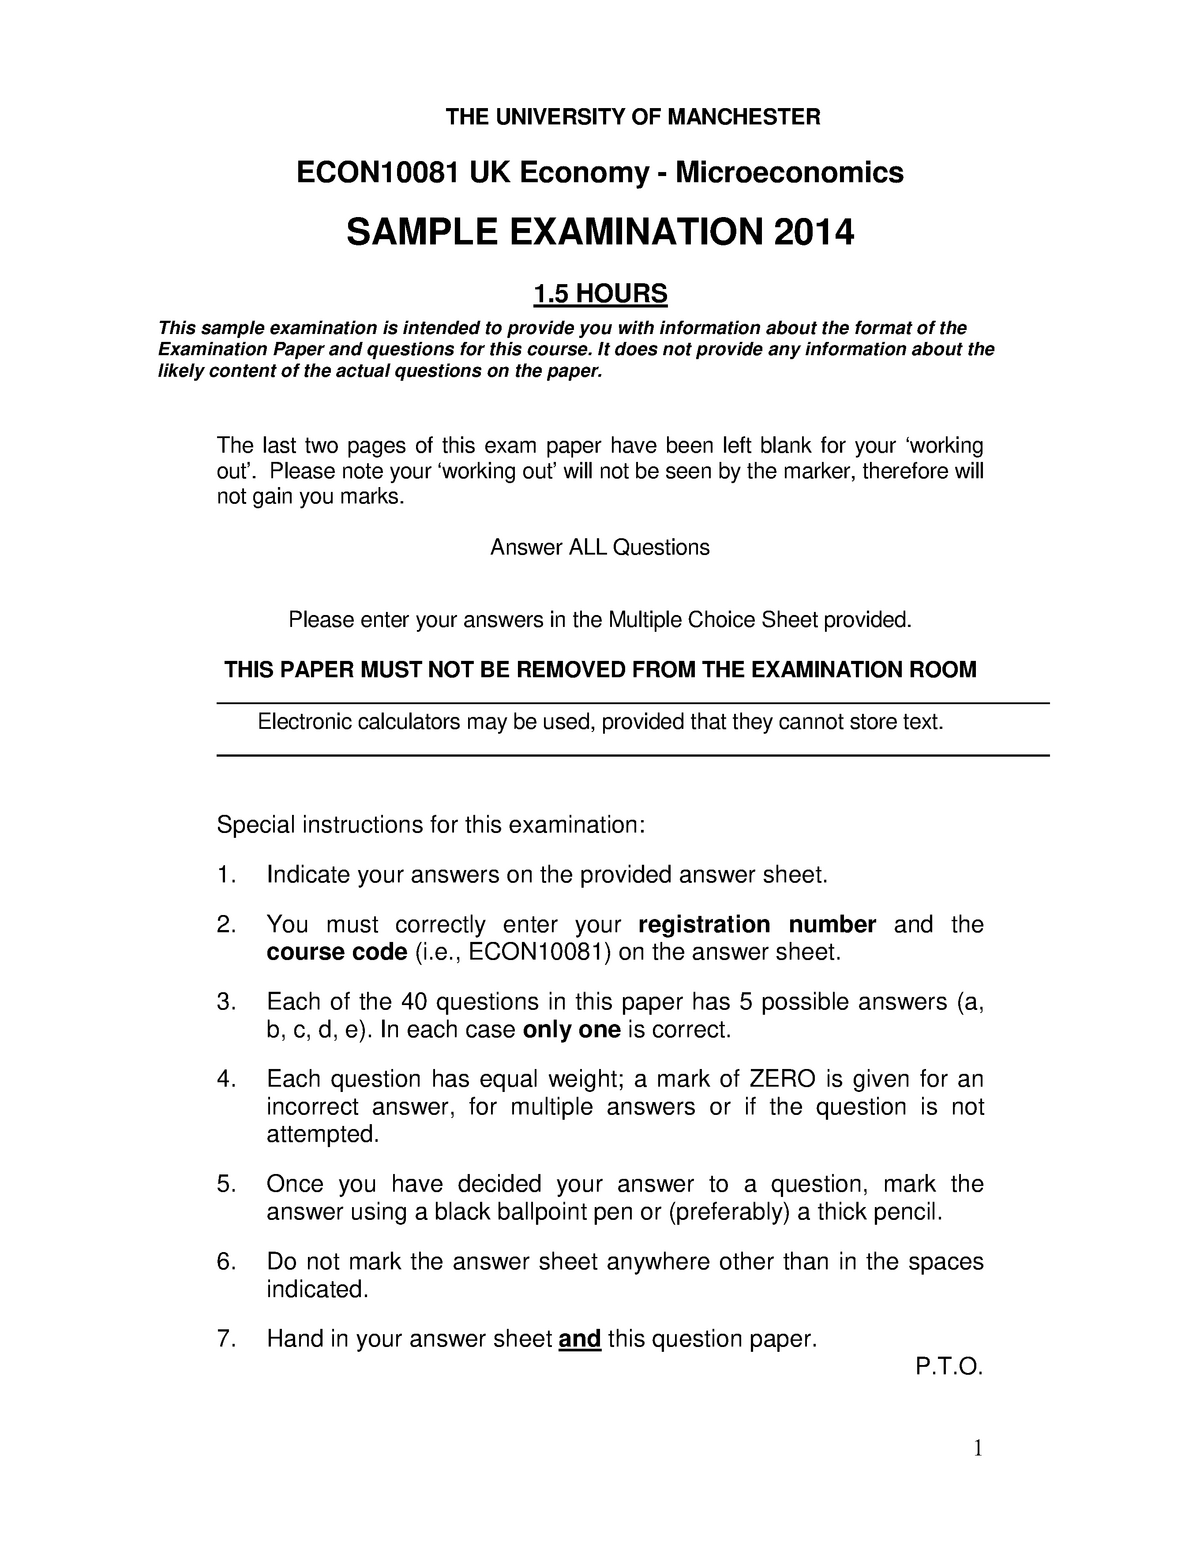 business plan exam questions and answers pdf